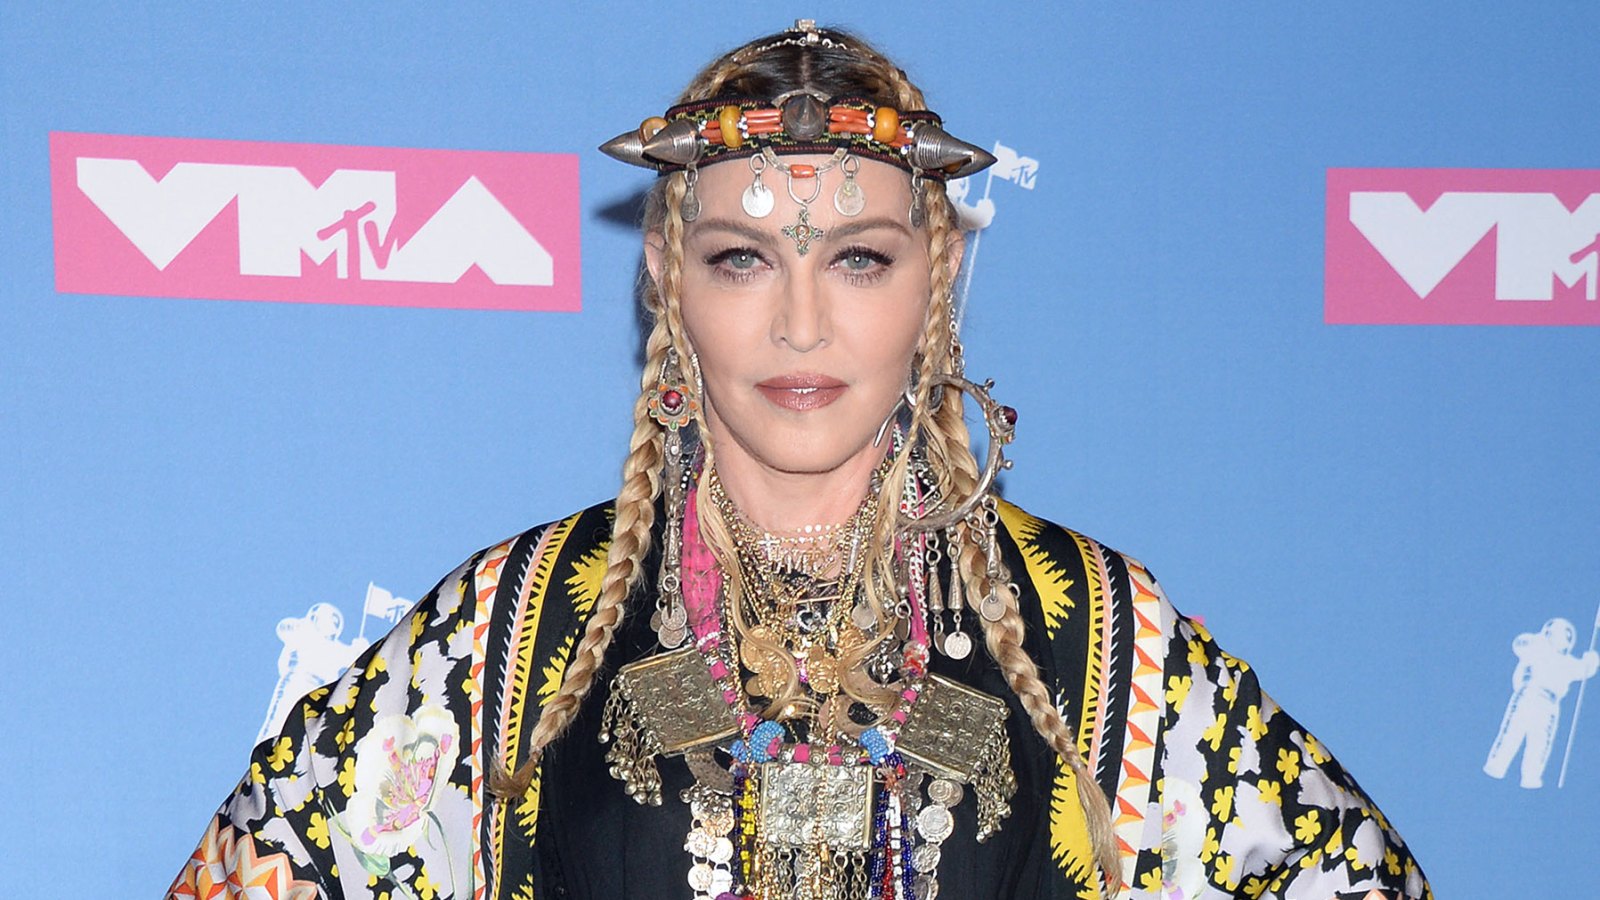 Madonna Upskirt - Madonna Is 'Throwing Her Heart and Soul' Into Biopic: Details